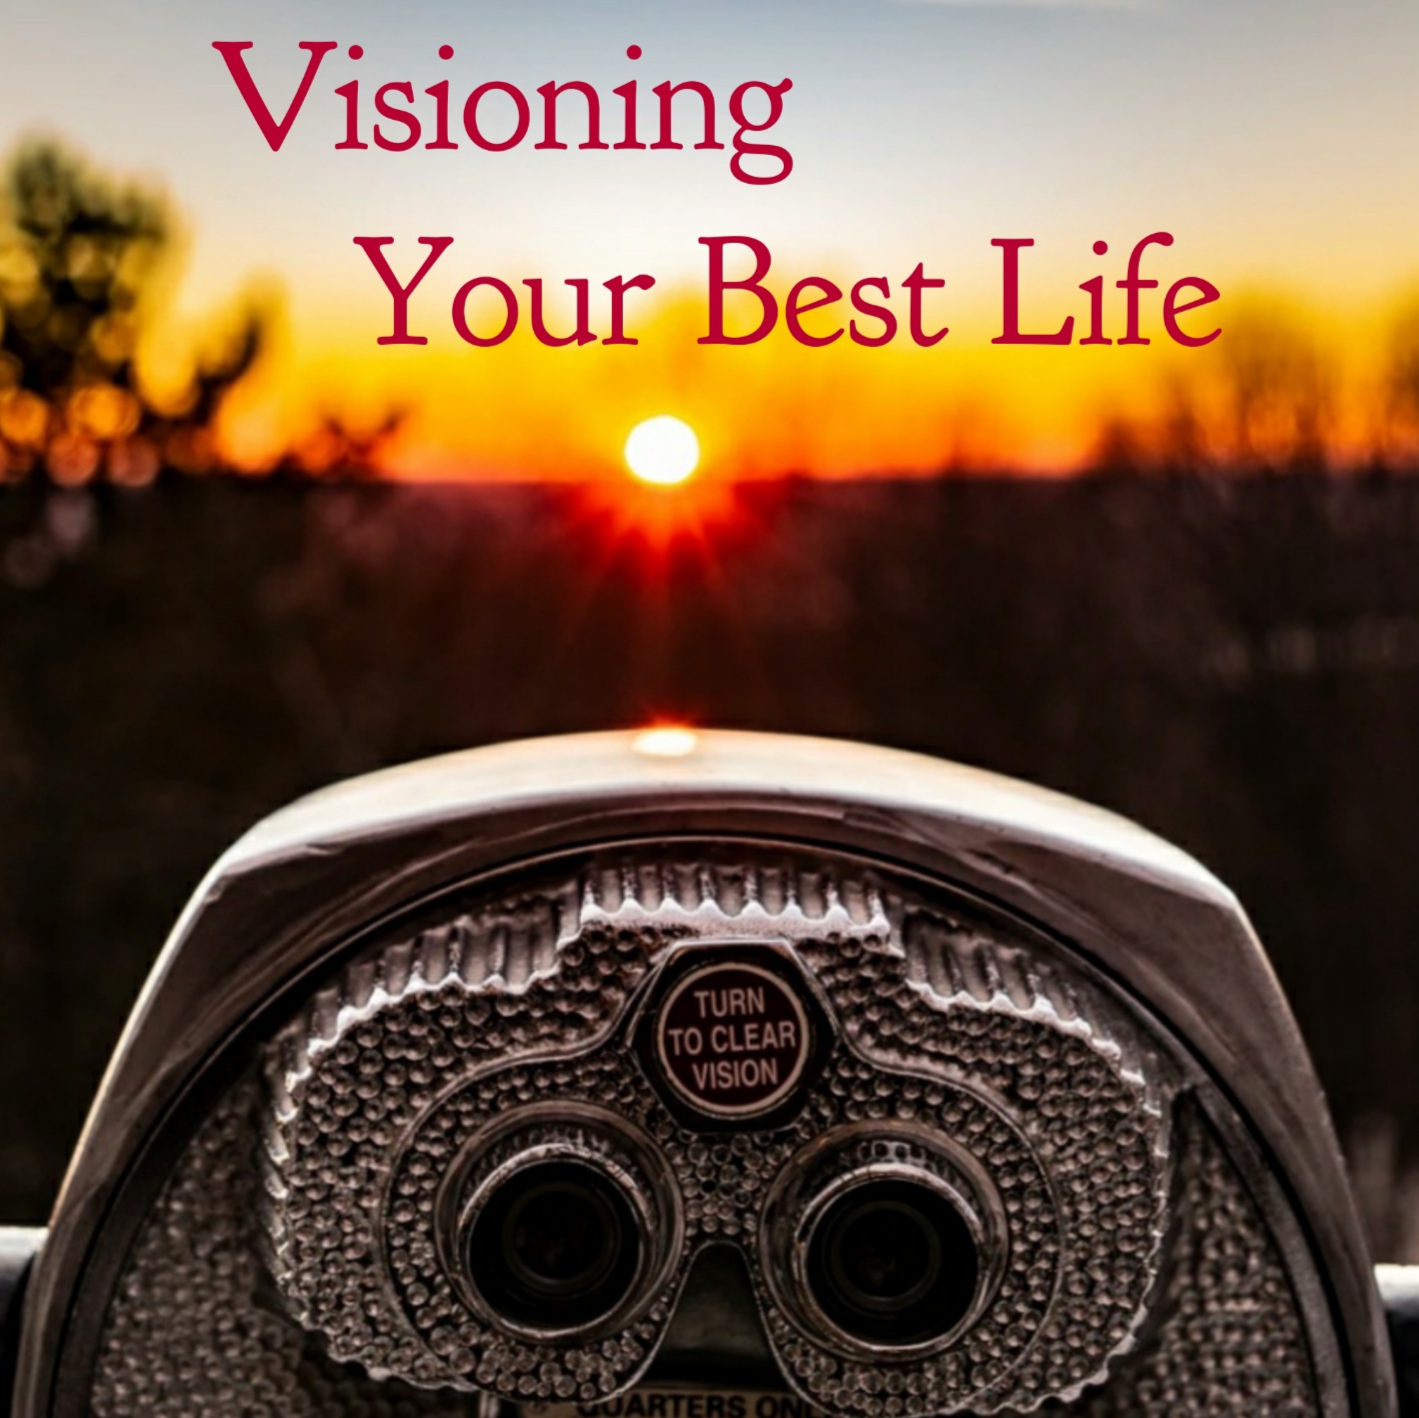 Visioning Your Best Life Image